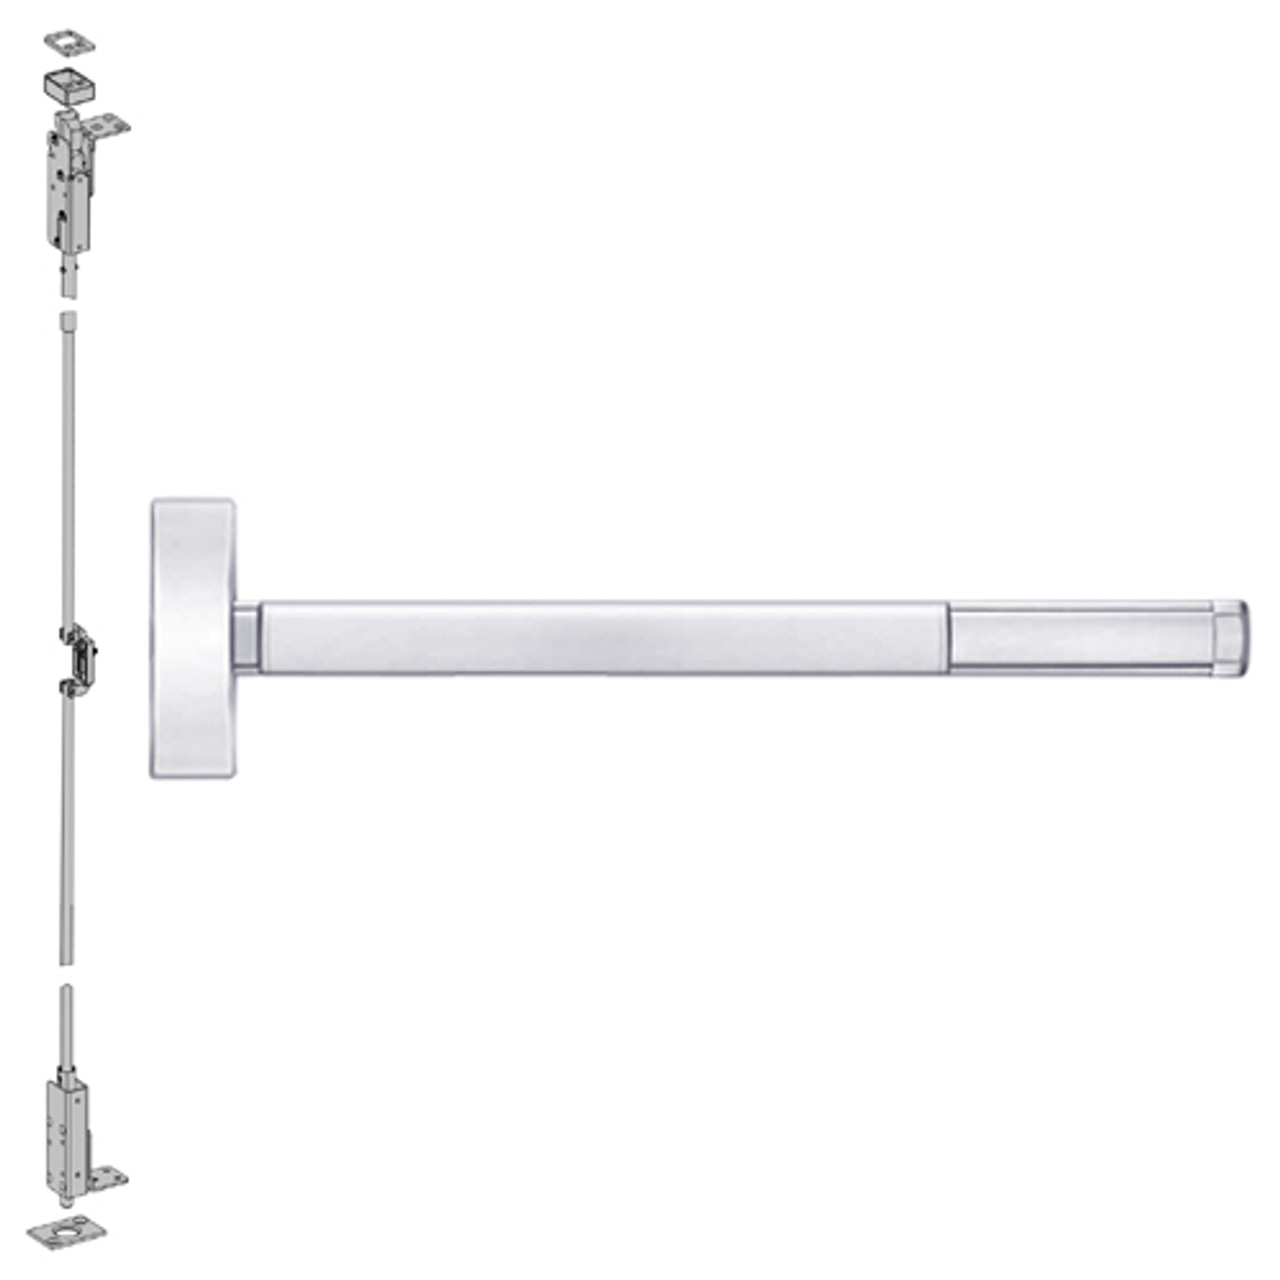 2703LBRCD-625-36 PHI 2700 Series Wood Door Concealed Vertical Rod Device Prepped for Key Retracts Latchbolt with Less Bottom Rod in Bright Chrome Finish